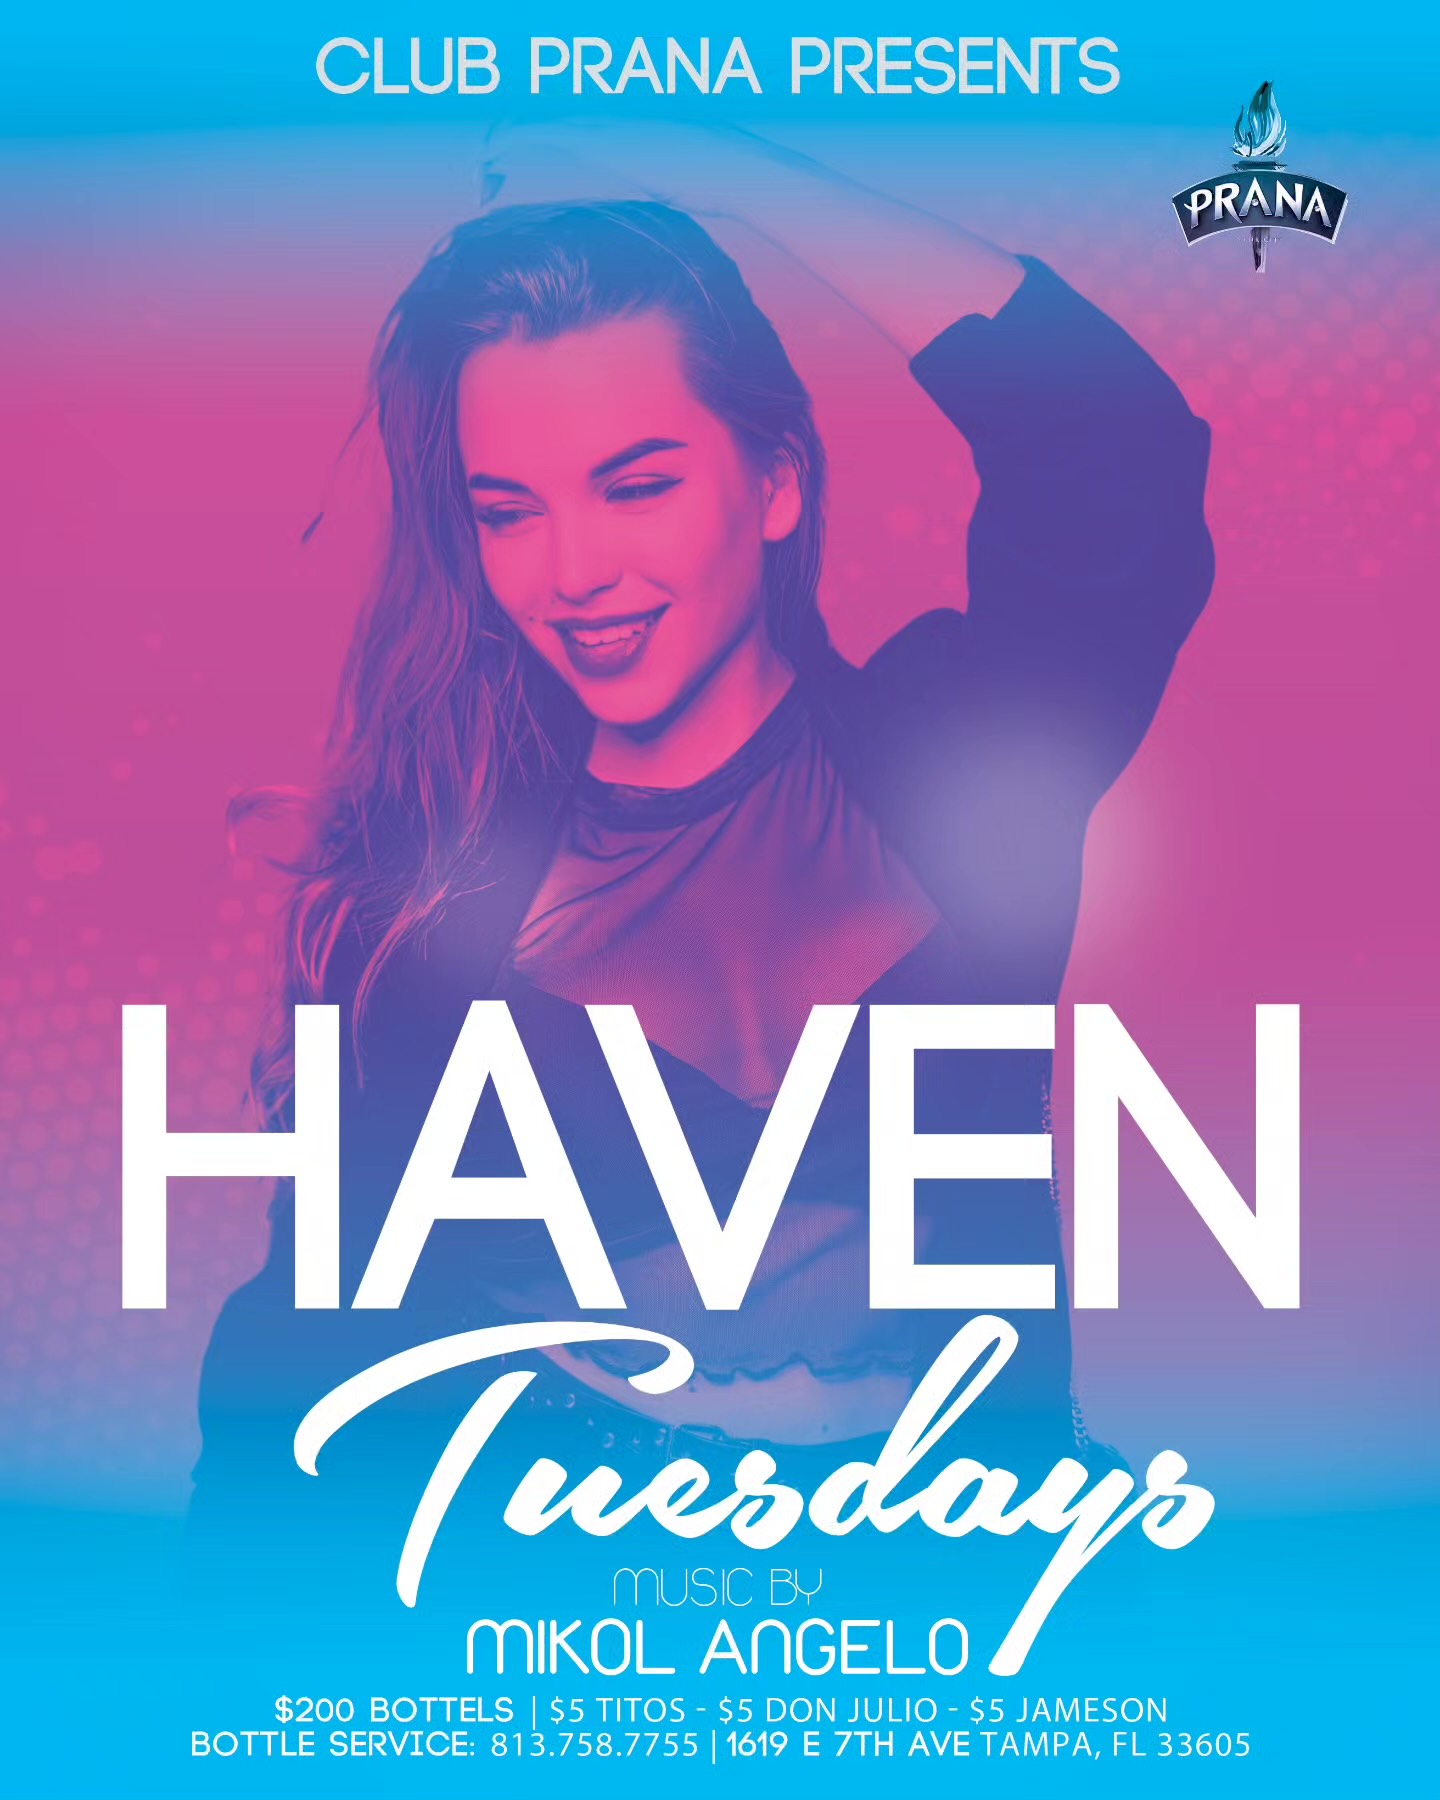 Event flyer for Club Prana Haven Tuesdays